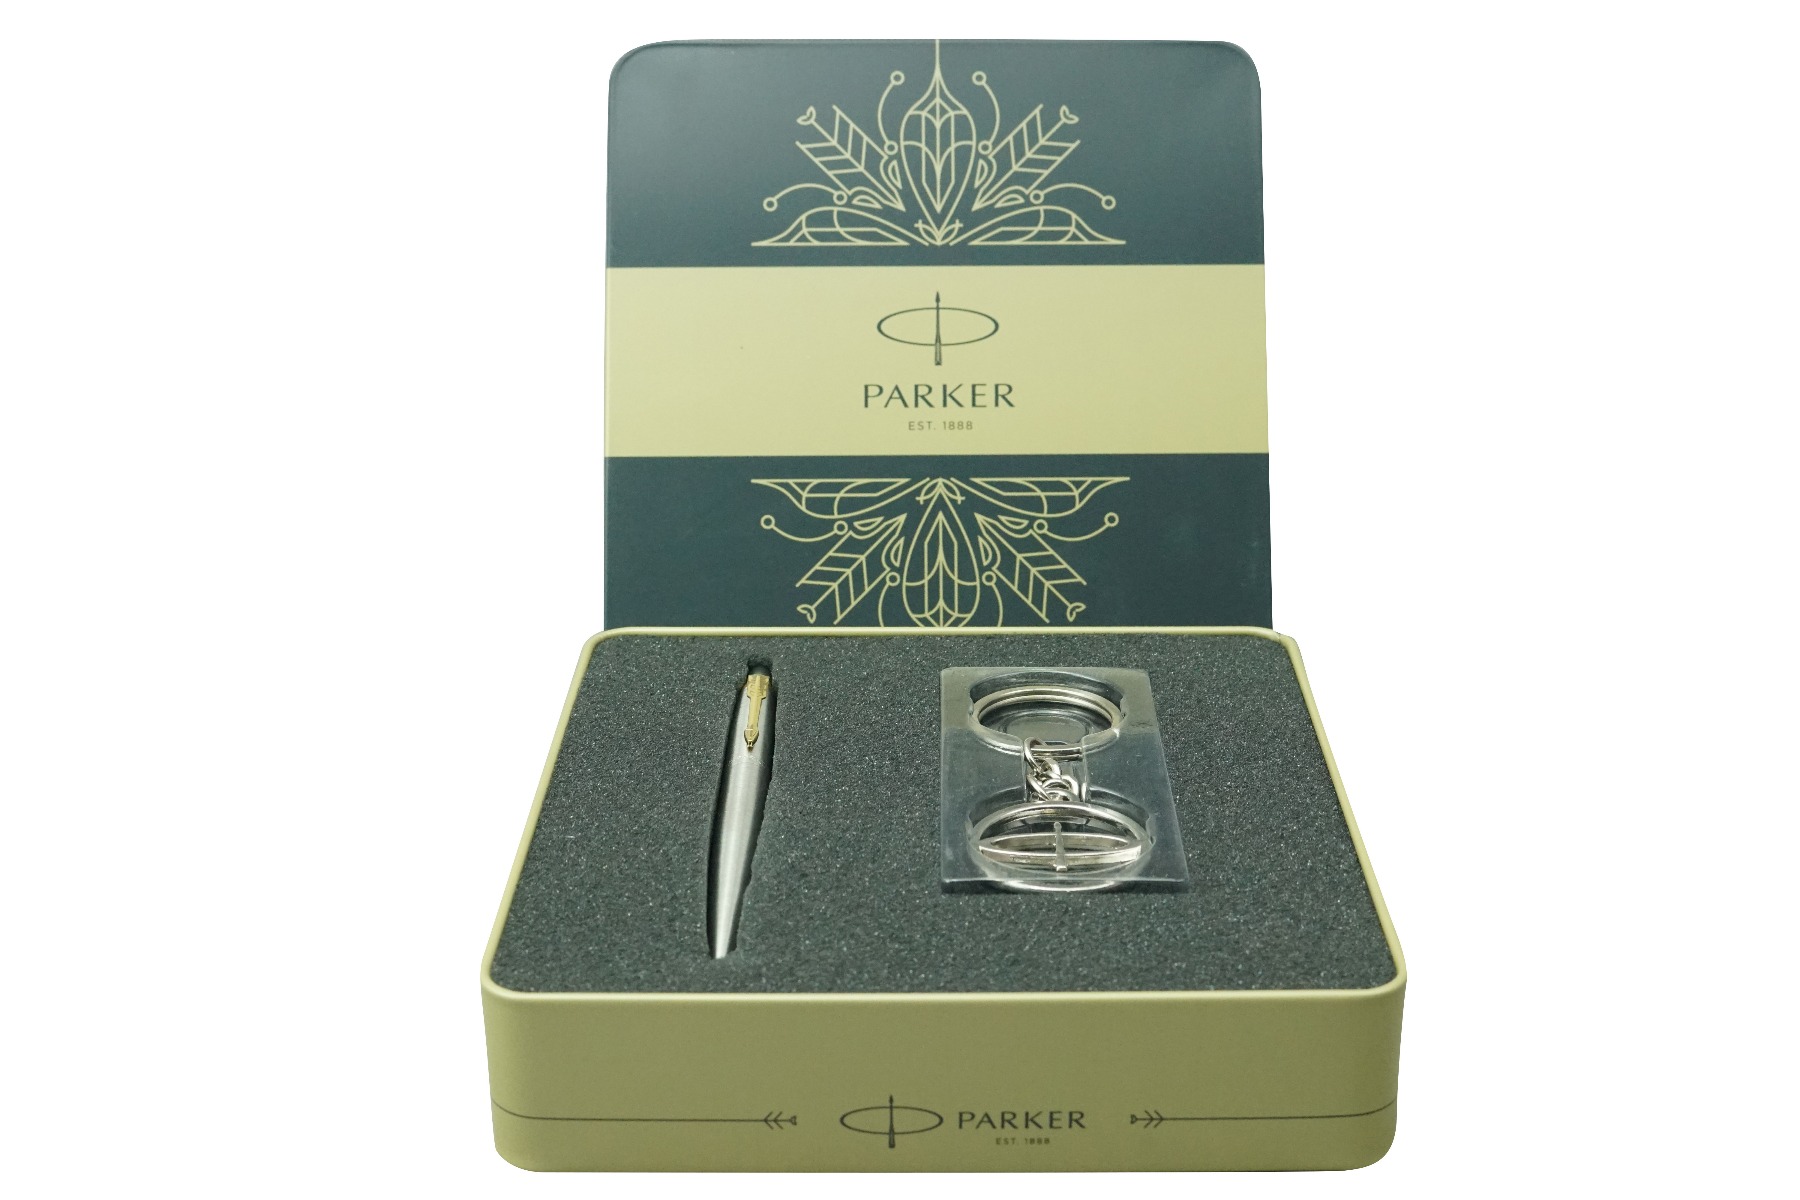 Parker Frontier Fountain Pen, Refillable, Chrome Trim, Gold Nib, Matte  Black with Free Card Holder (1 Count, Ink - Blue), Perfect for Gifting,  Premium Pen for Writers : Amazon.in: Office Products